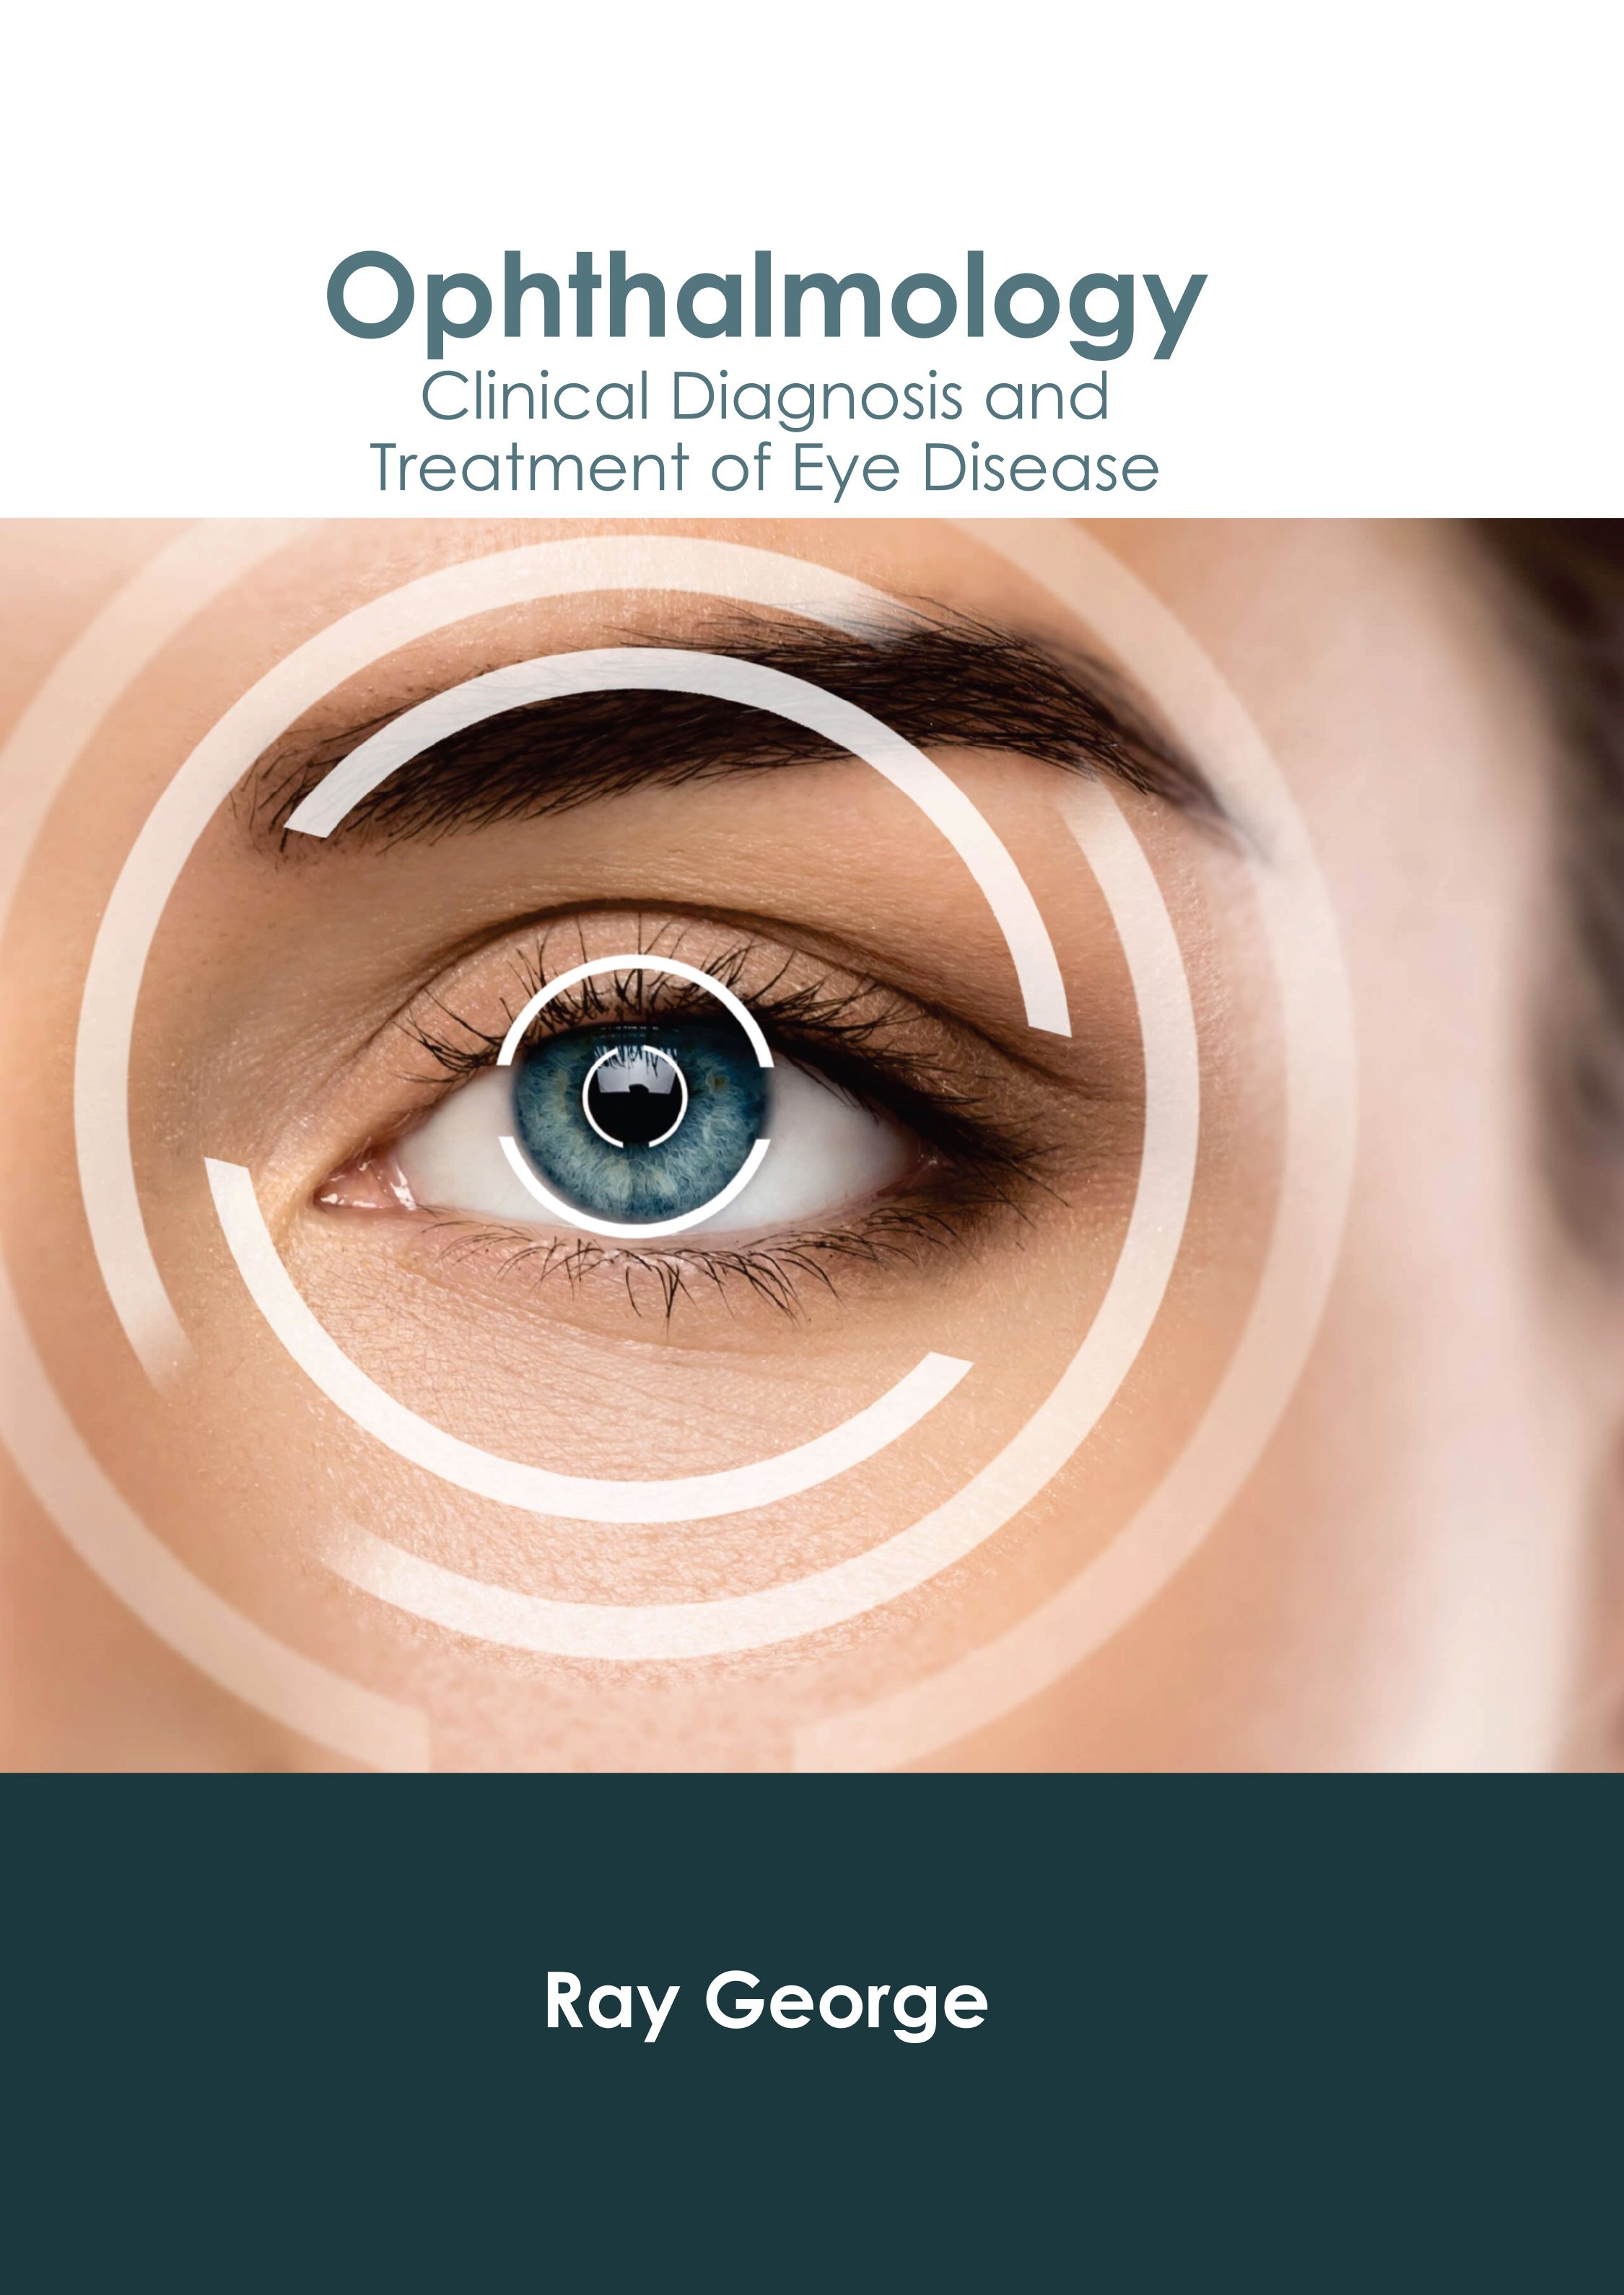 OPHTHALMOLOGY: CLINICAL DIAGNOSIS AND TREATMENT OF EYE DISEASE